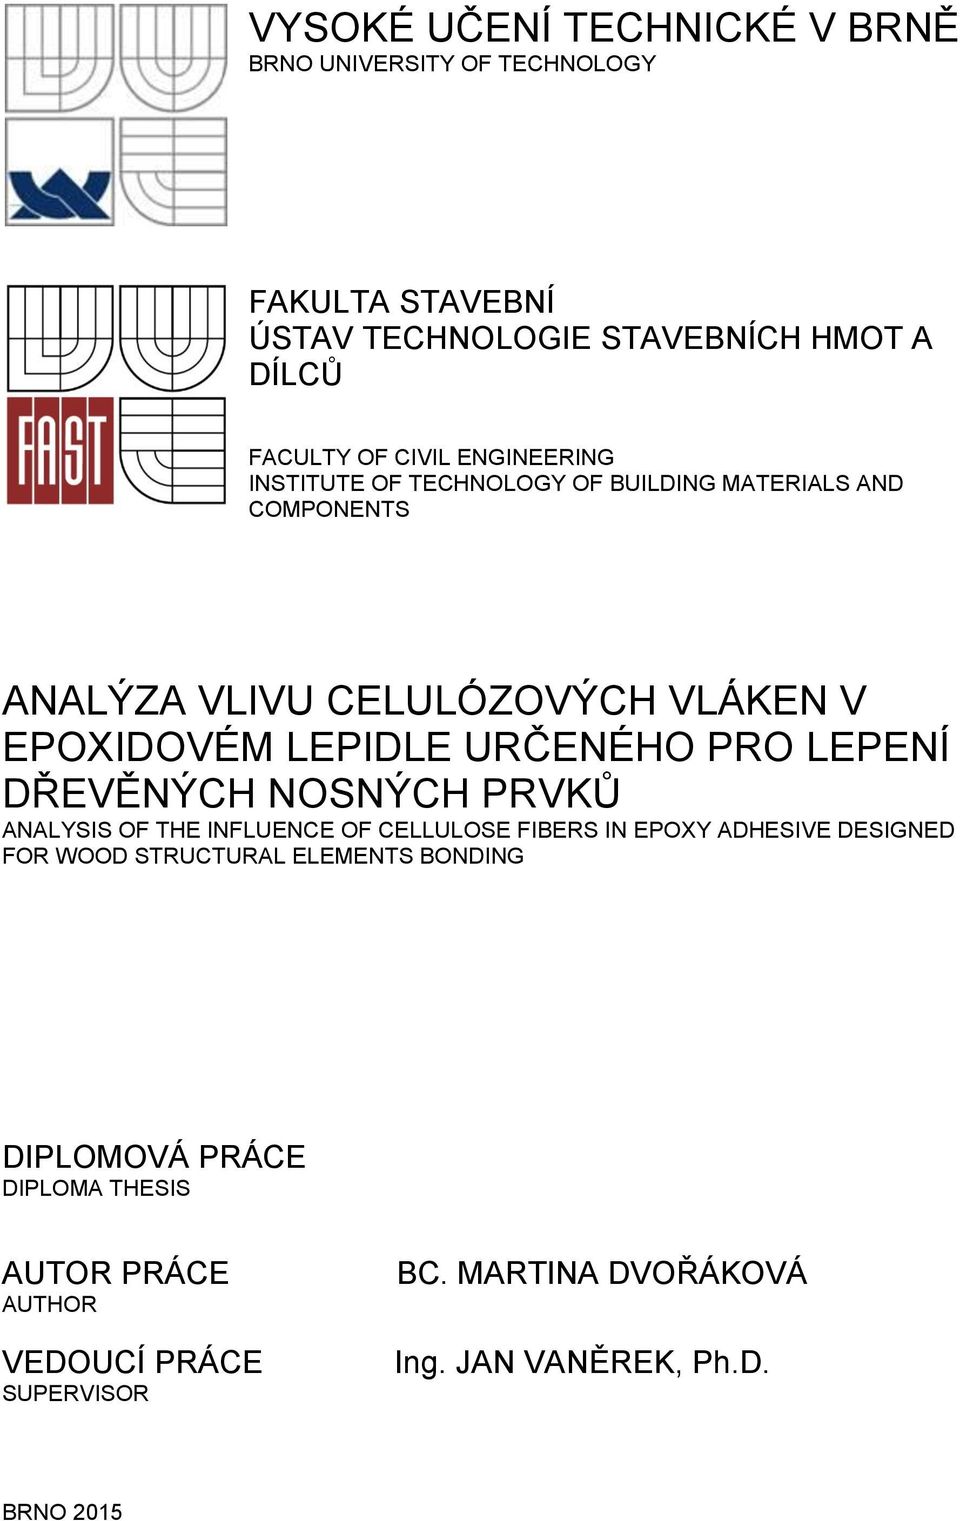 PRO LEPENÍ DŘEVĚNÝCH NOSNÝCH PRVKŮ ANALYSIS OF THE INFLUENCE OF CELLULOSE FIBERS IN EPOXY ADHESIVE DESIGNED FOR WOOD STRUCTURAL ELEMENTS